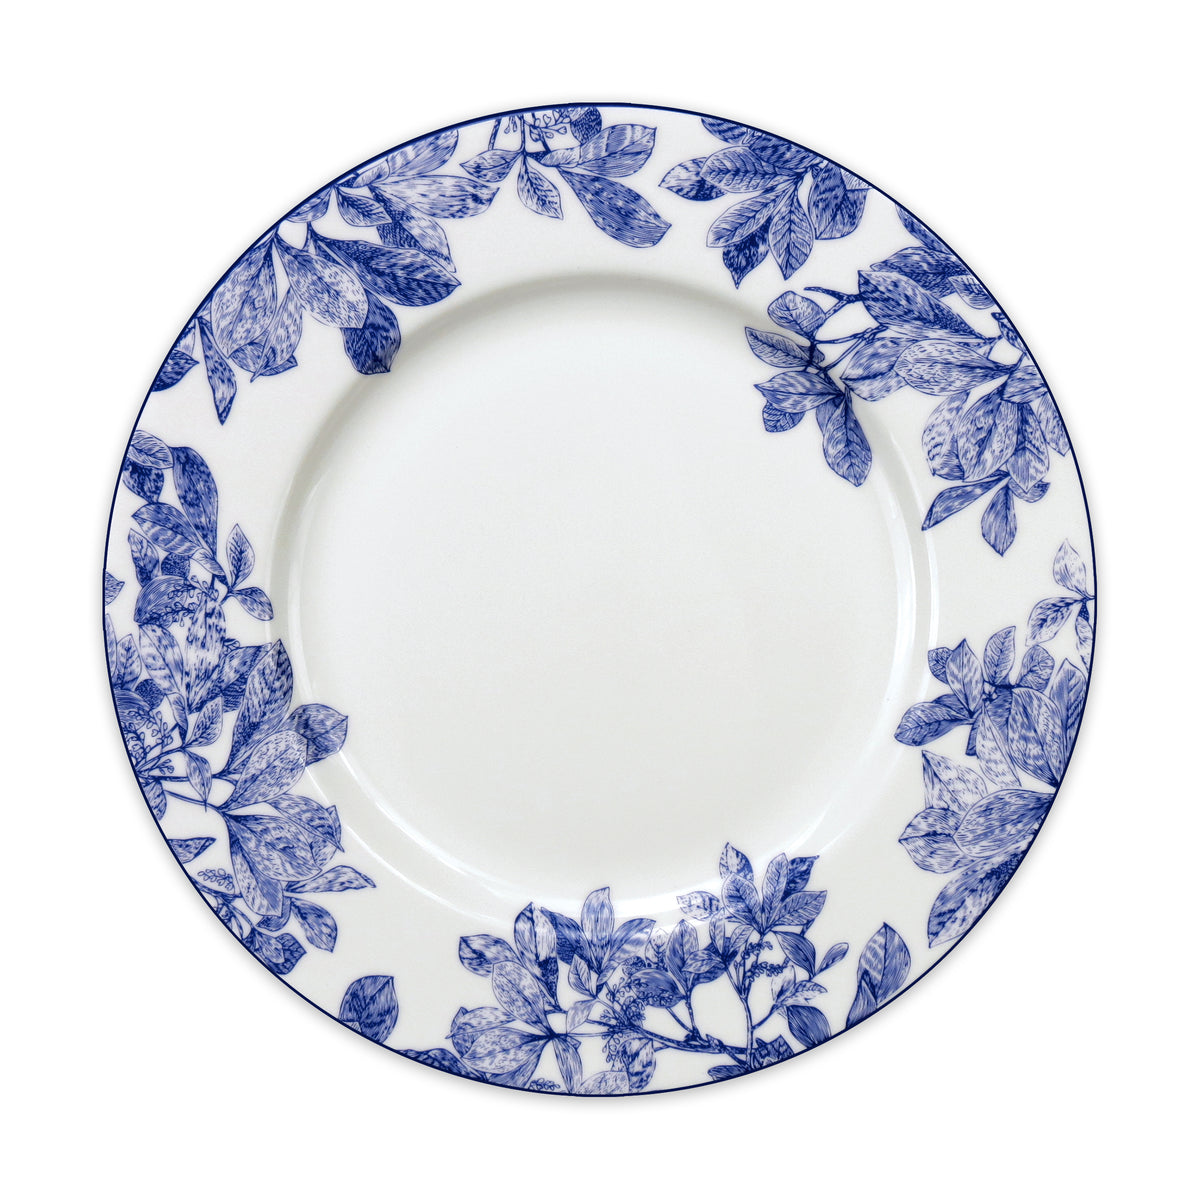 A Caskata Artisanal Home Arbor Blue Rimmed Dinner plate set with a blue floral pattern around the rim.